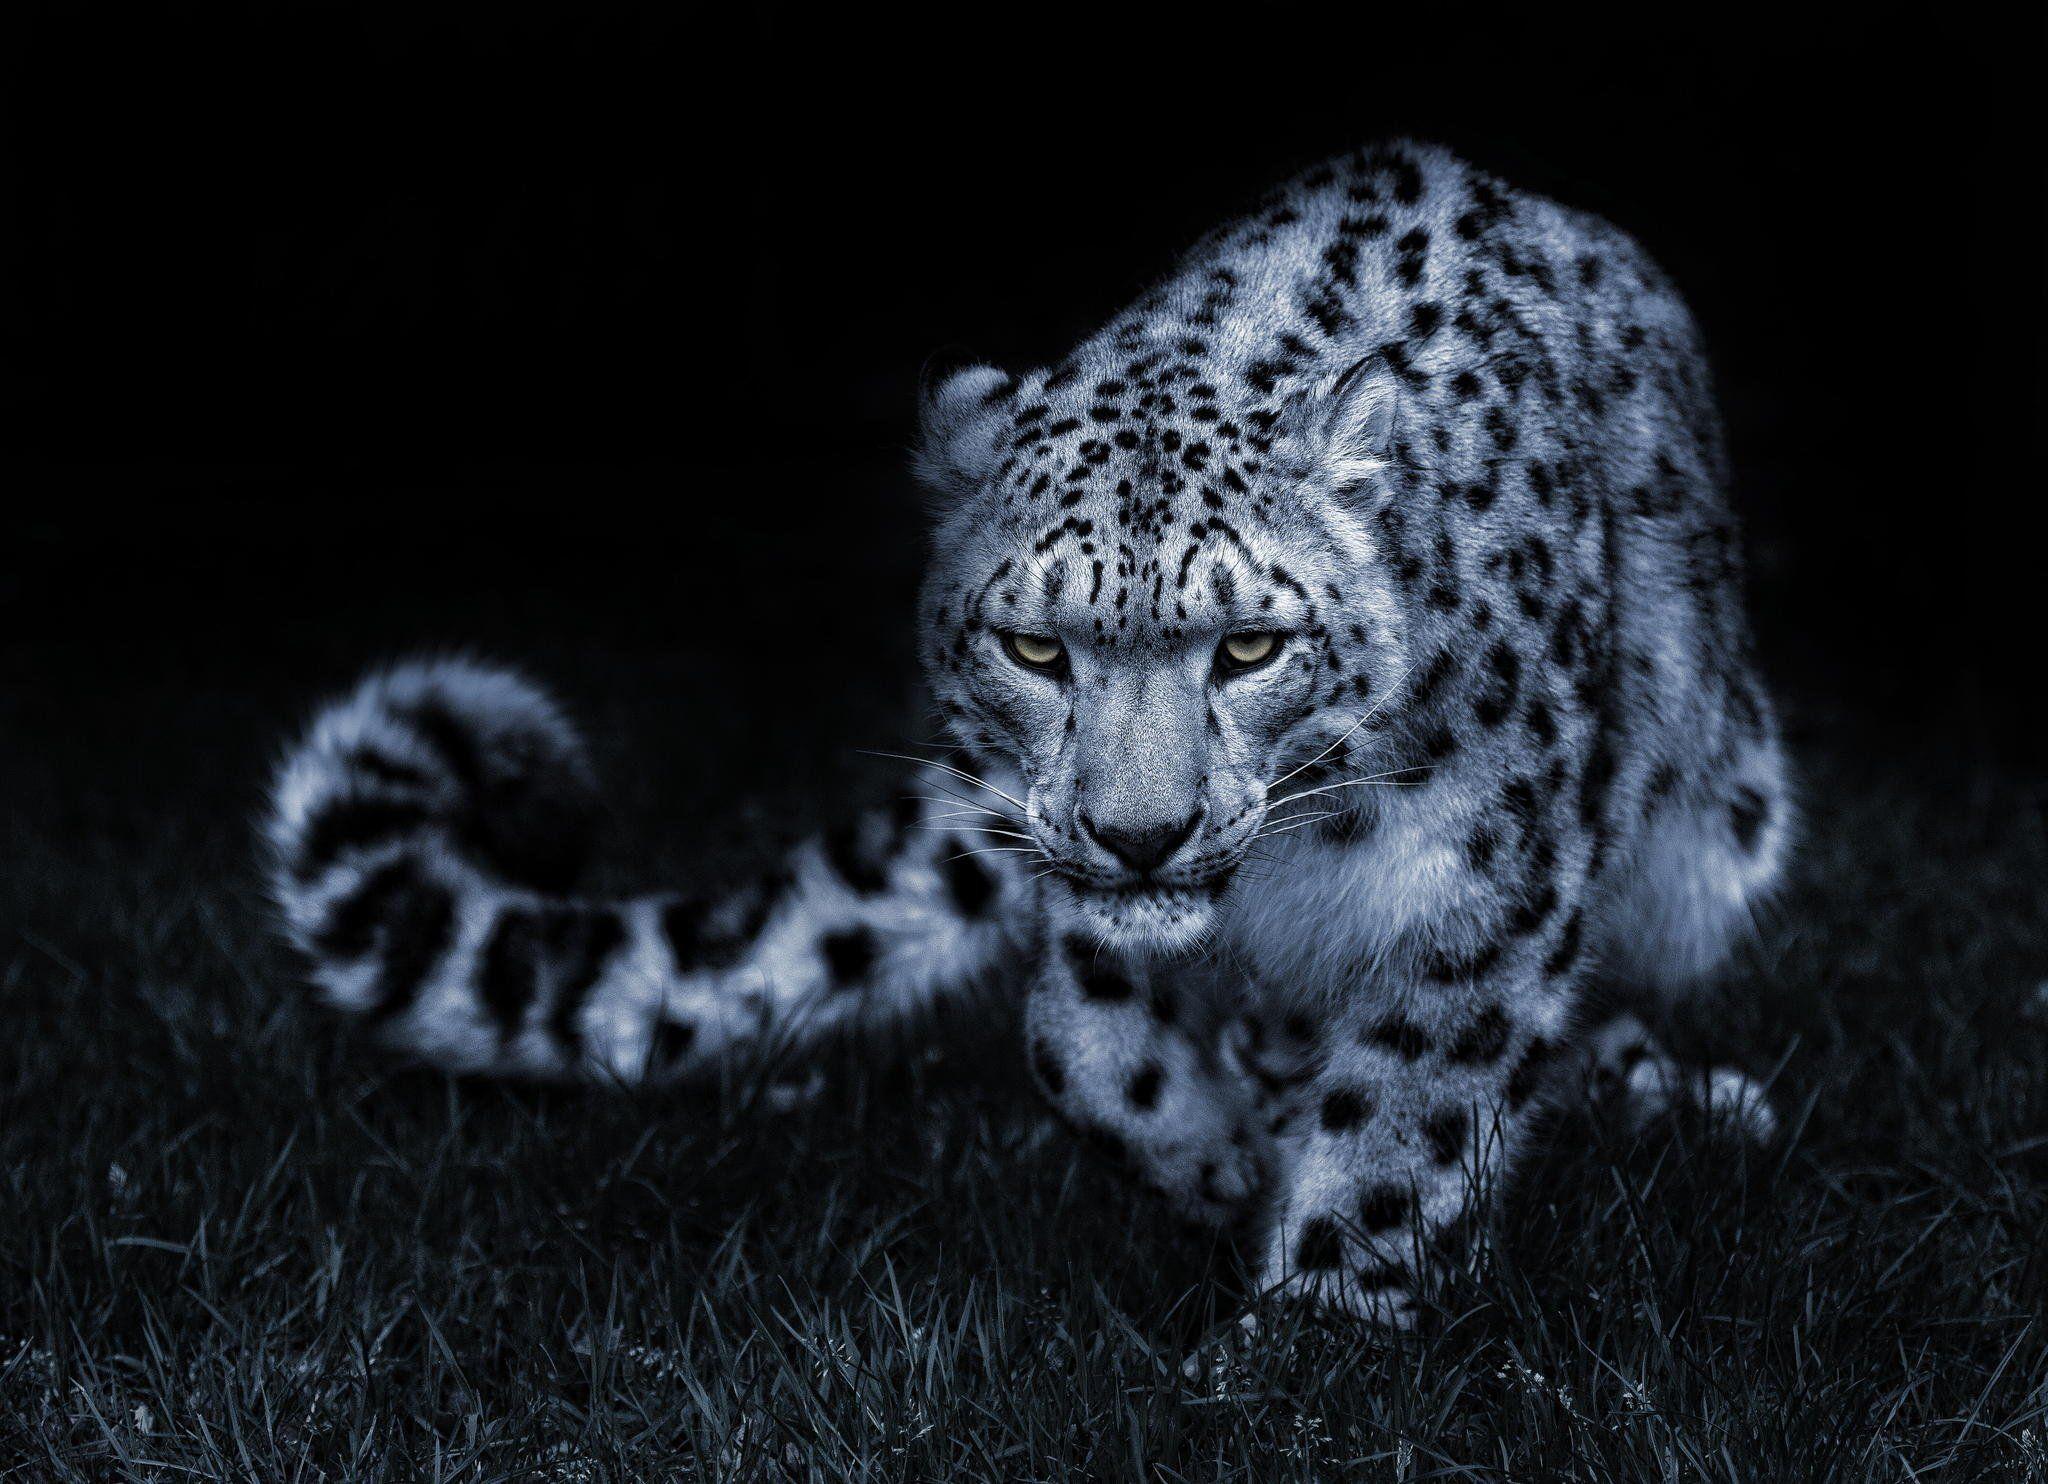 Snow leopard black and white posture eyes cat wallpapers